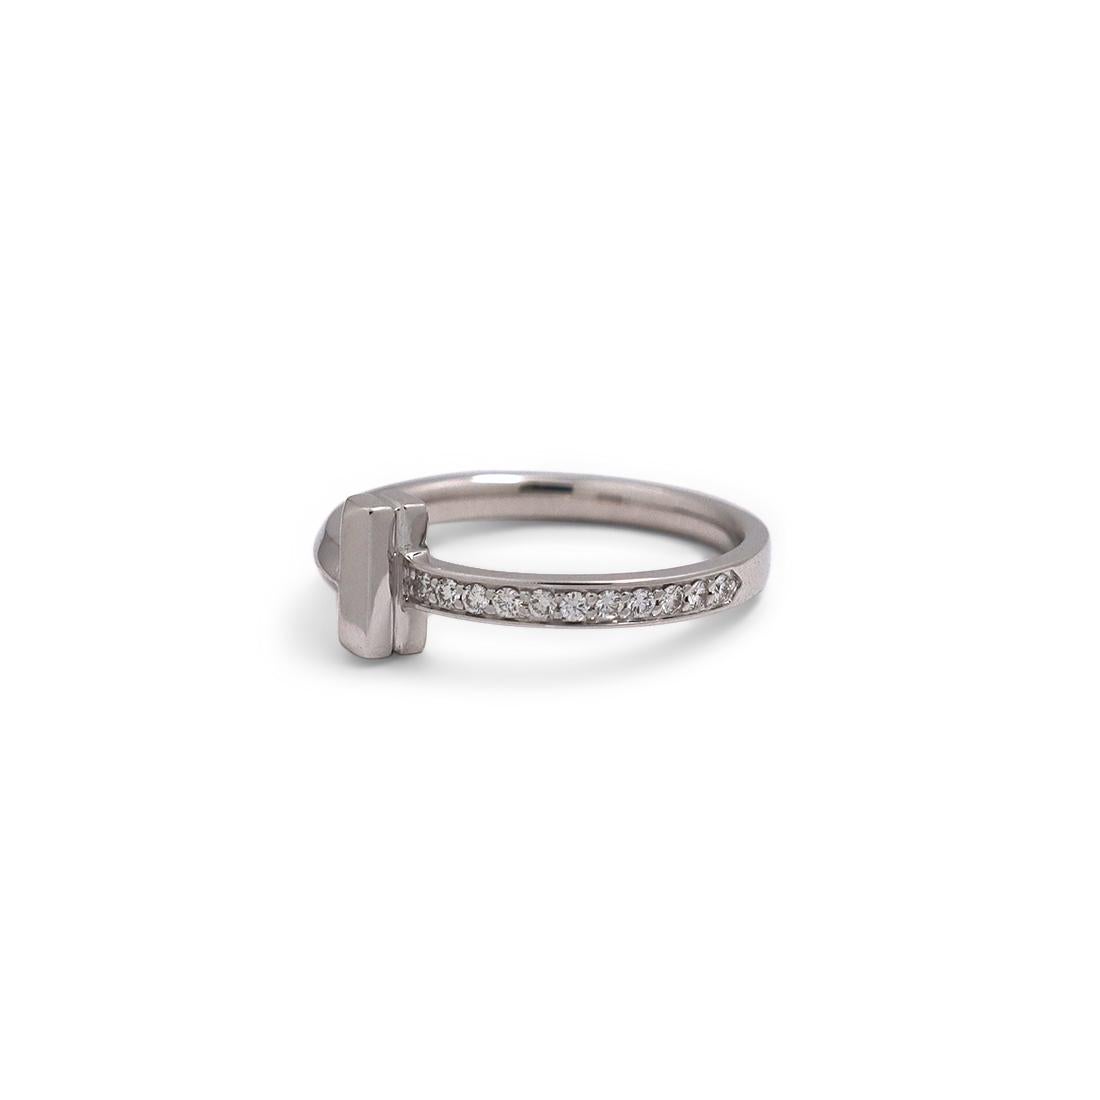 Authentic Tiffany & Co. 'Tiffany T1' ring crafted in 18 karat white gold. The bold 'T' design is accented with an estimated 0.09 carats of high quality pave diamonds. Signed T&Co., AU750, ITALY. Ring size 6 1/2 US, 53 EU. The ring is presented with